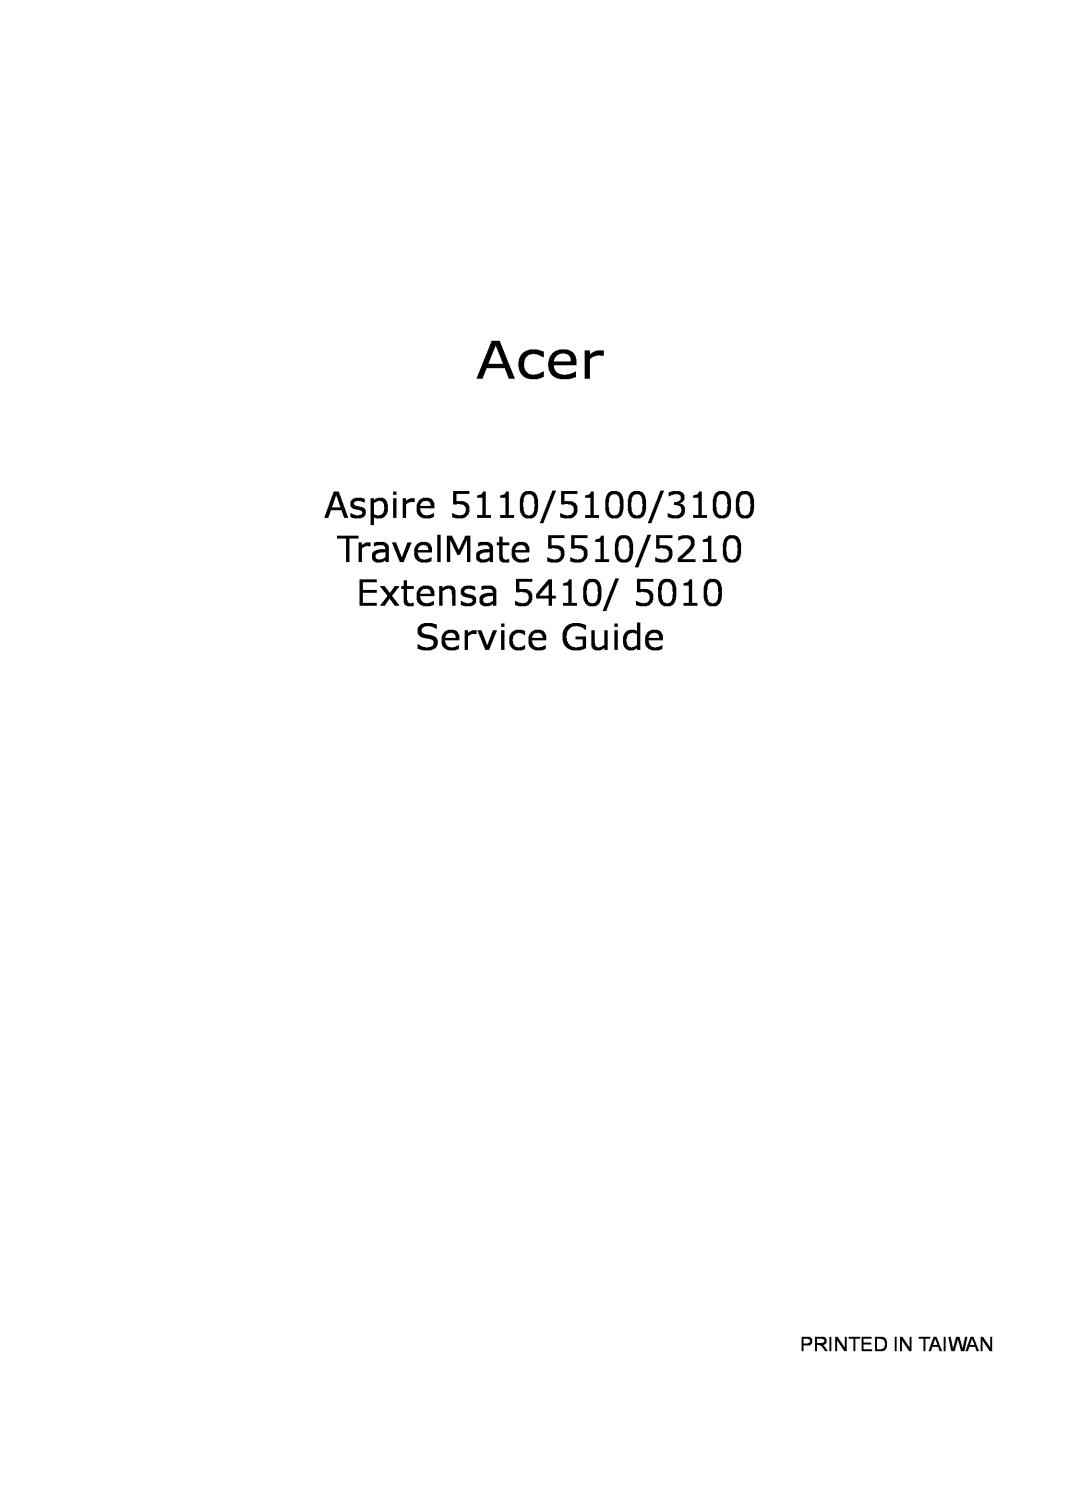 Acer 5010 manual Aspire 5110/5100/3100 TravelMate 5510/5210 Extensa 5410 Service Guide, Printed In Taiwan, Acer 